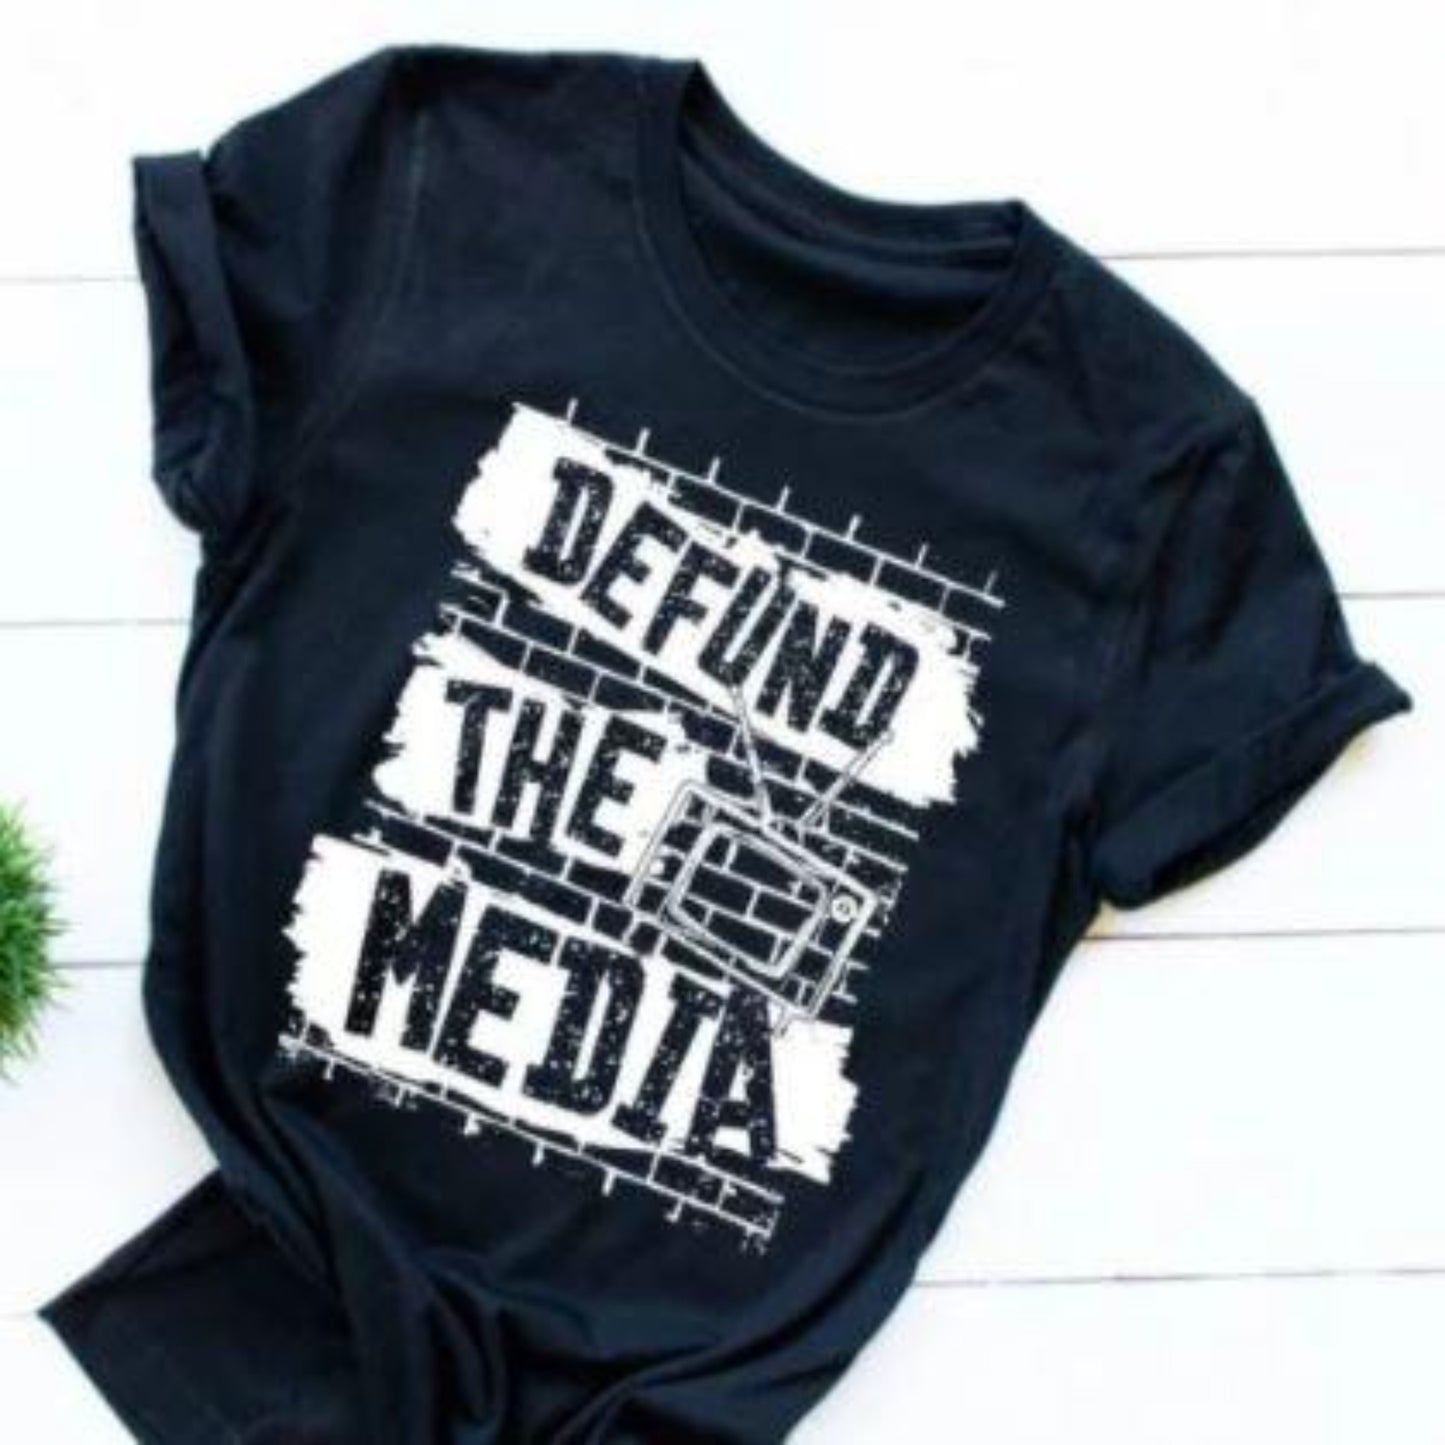 defund_the_media specialty tee casual shirt everyday tshirt comfortable wear